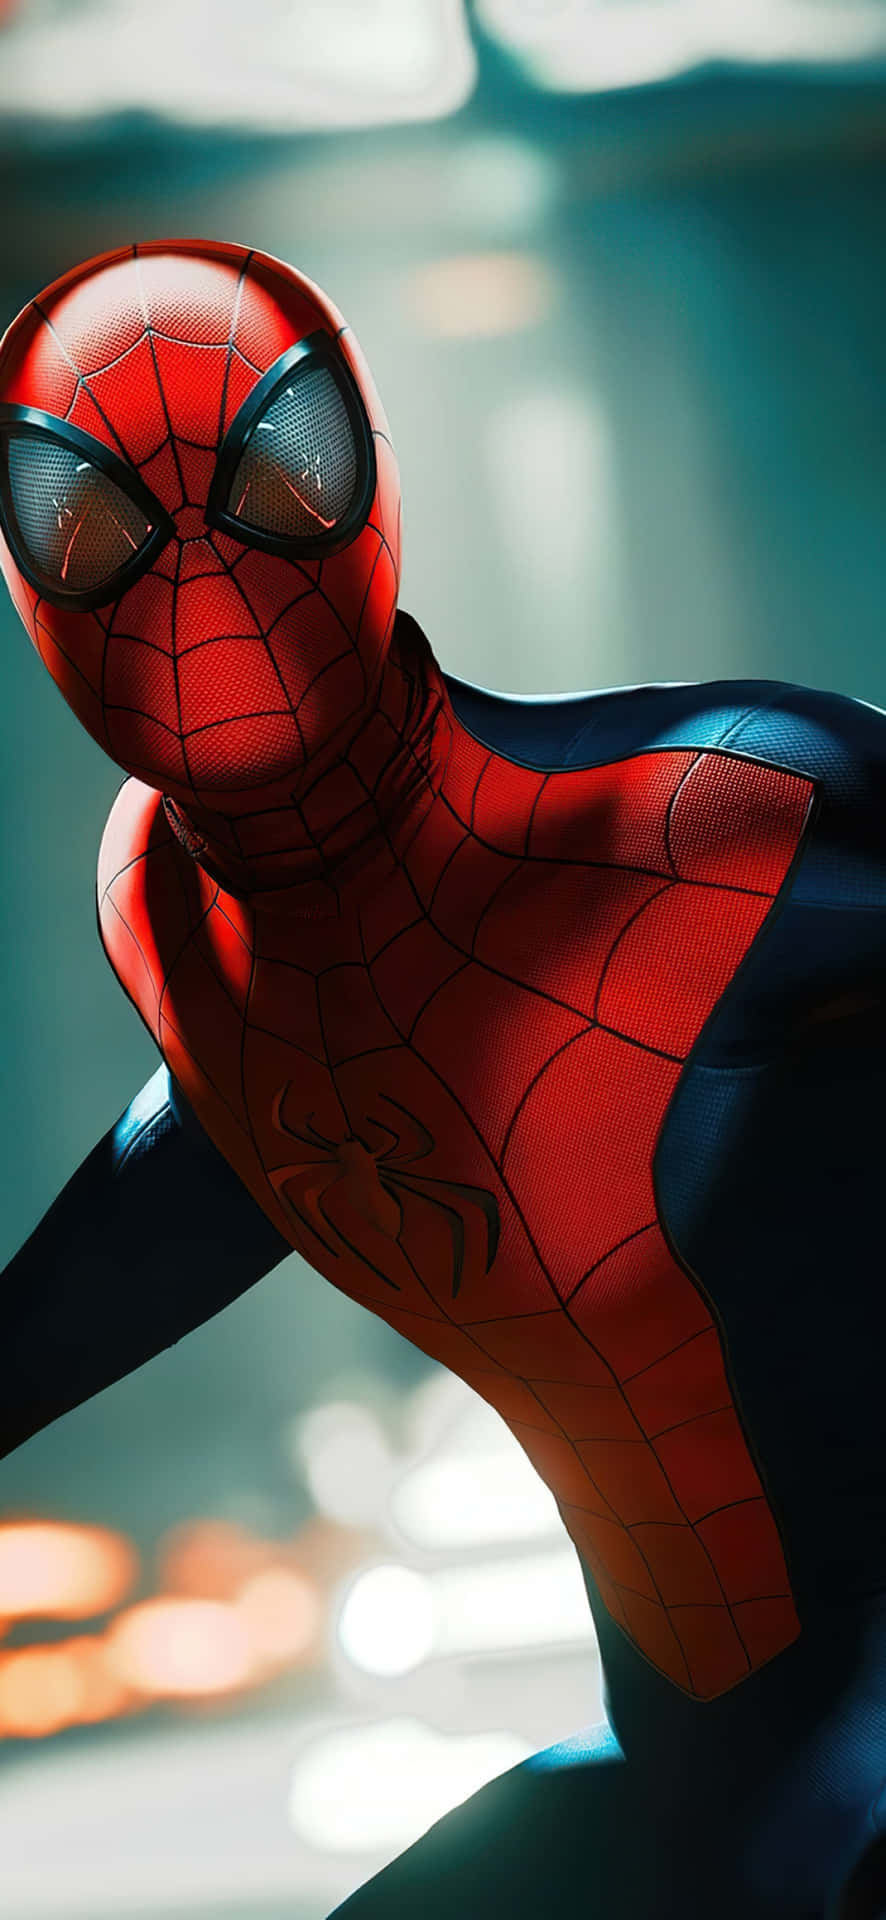 Enjoy playing an amazing spider man game on your Iphone Wallpaper